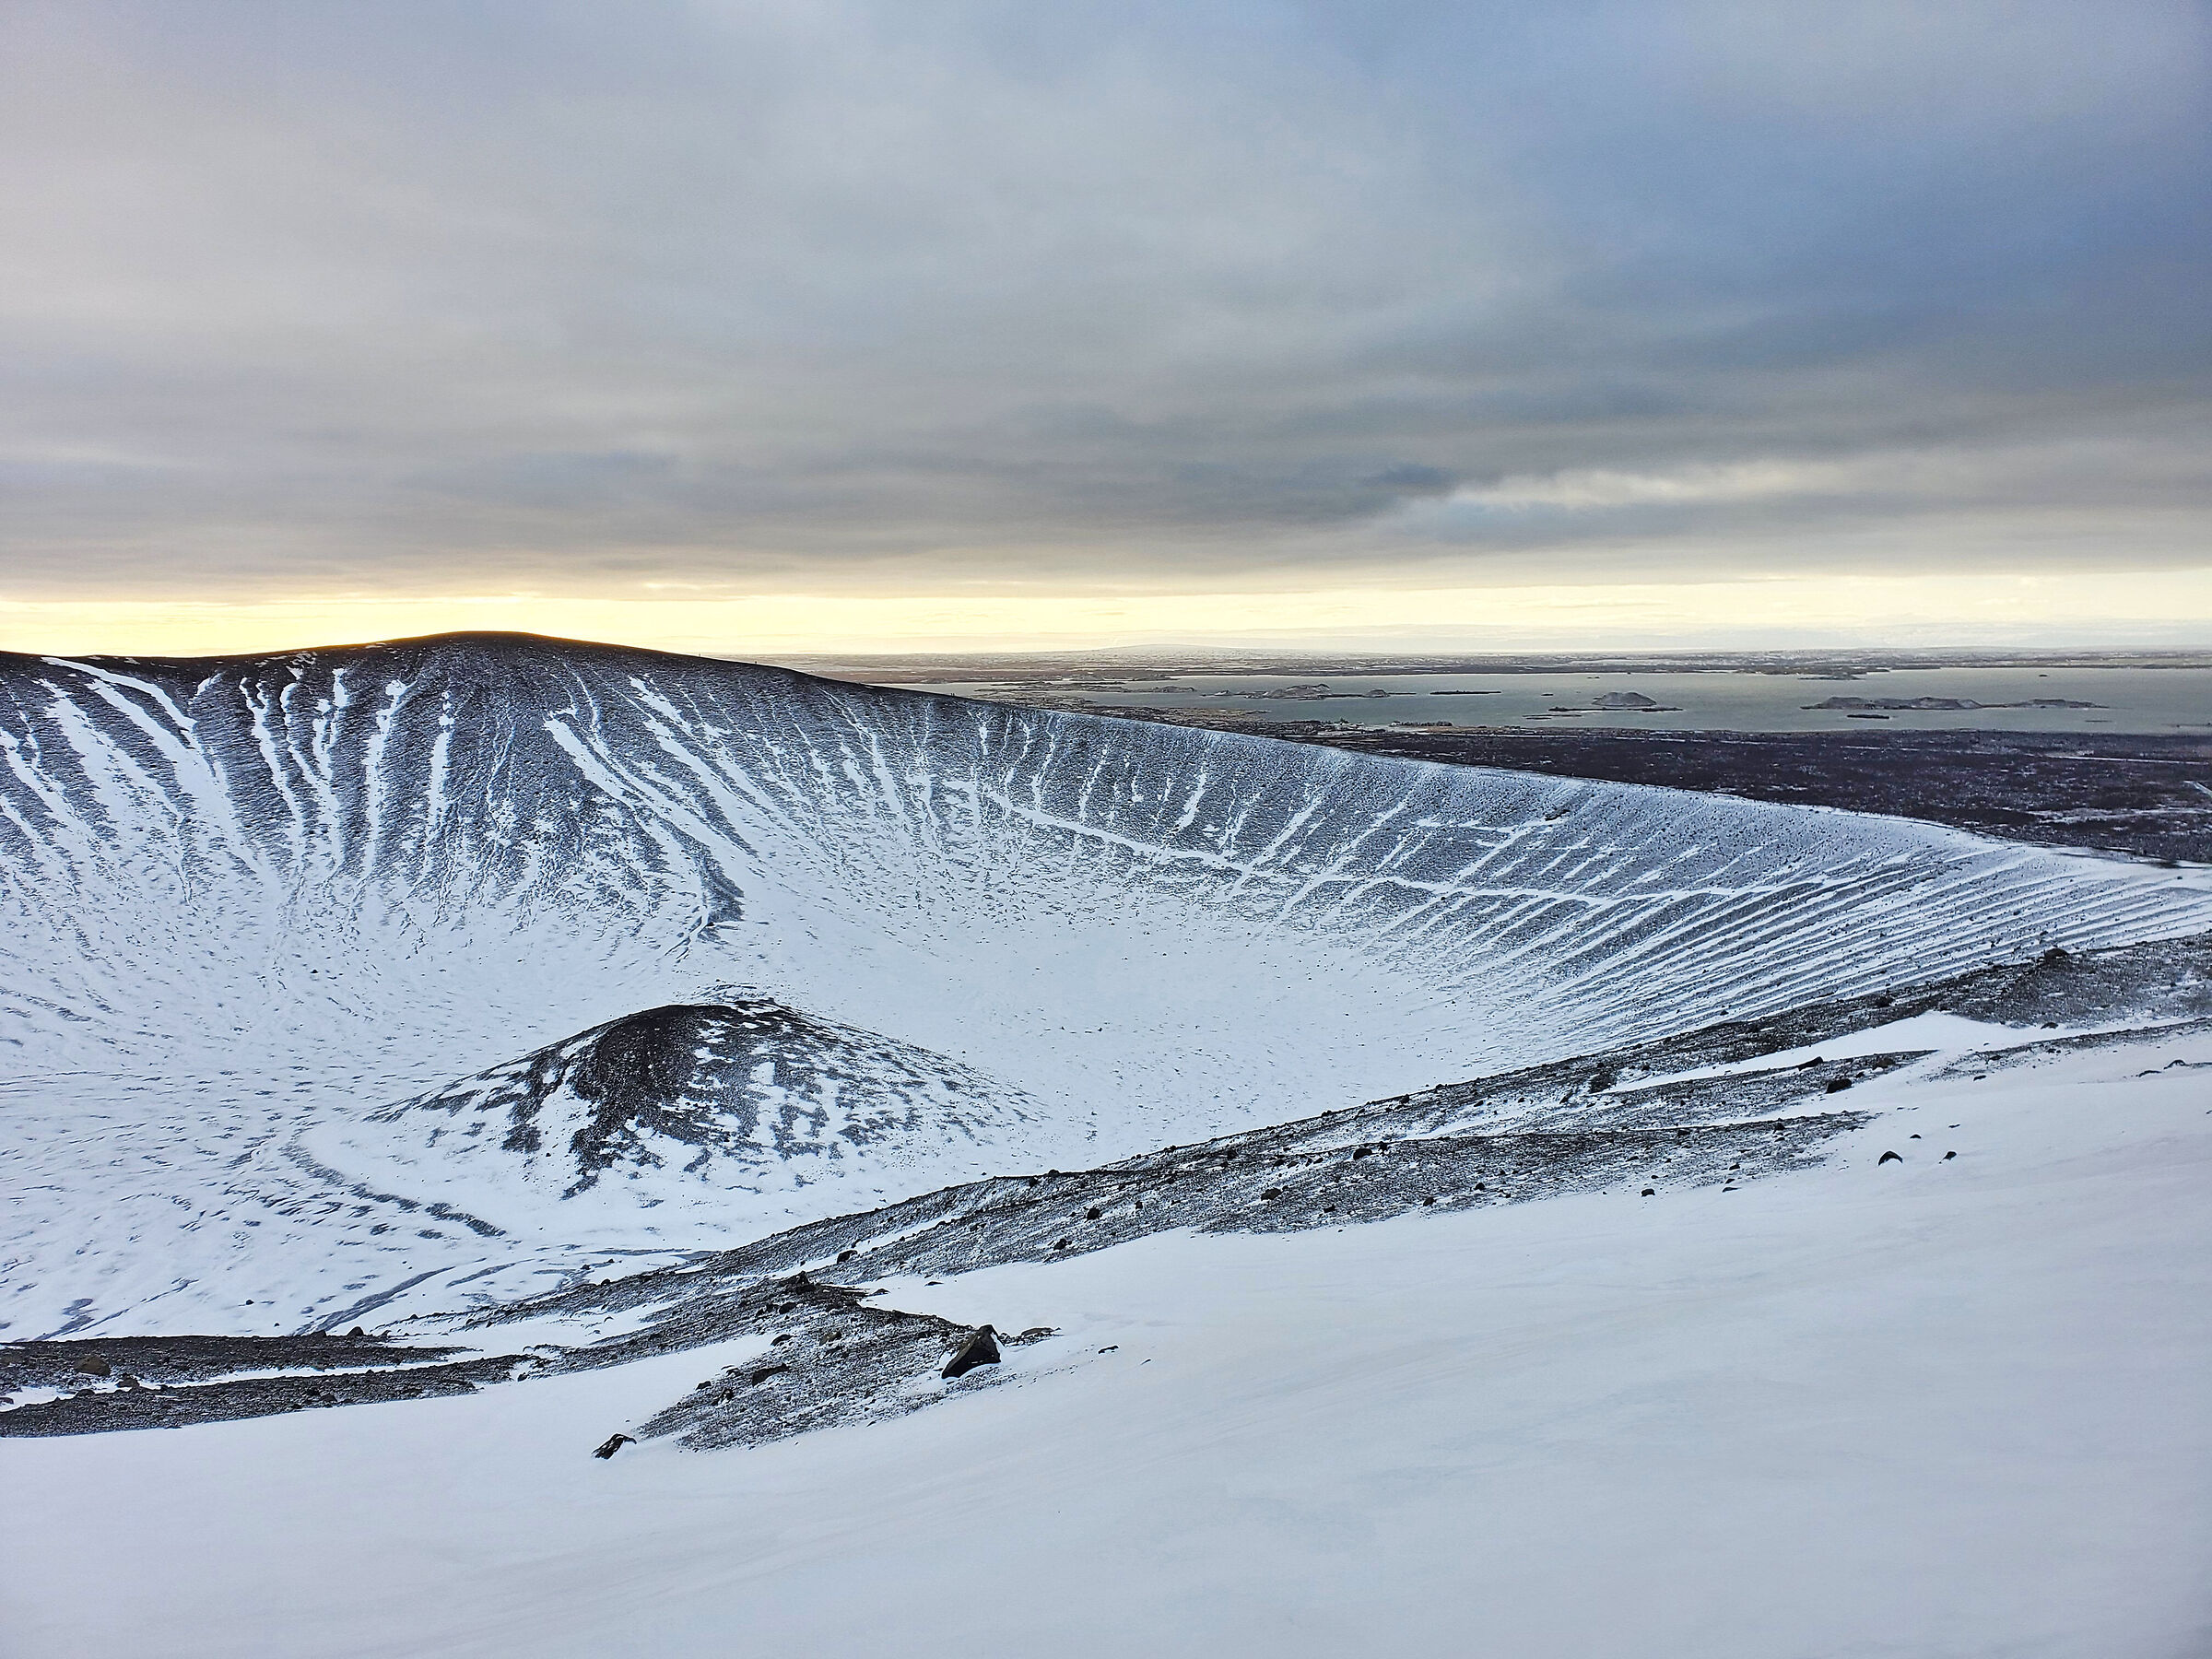 Il cratere di Hverfjall...